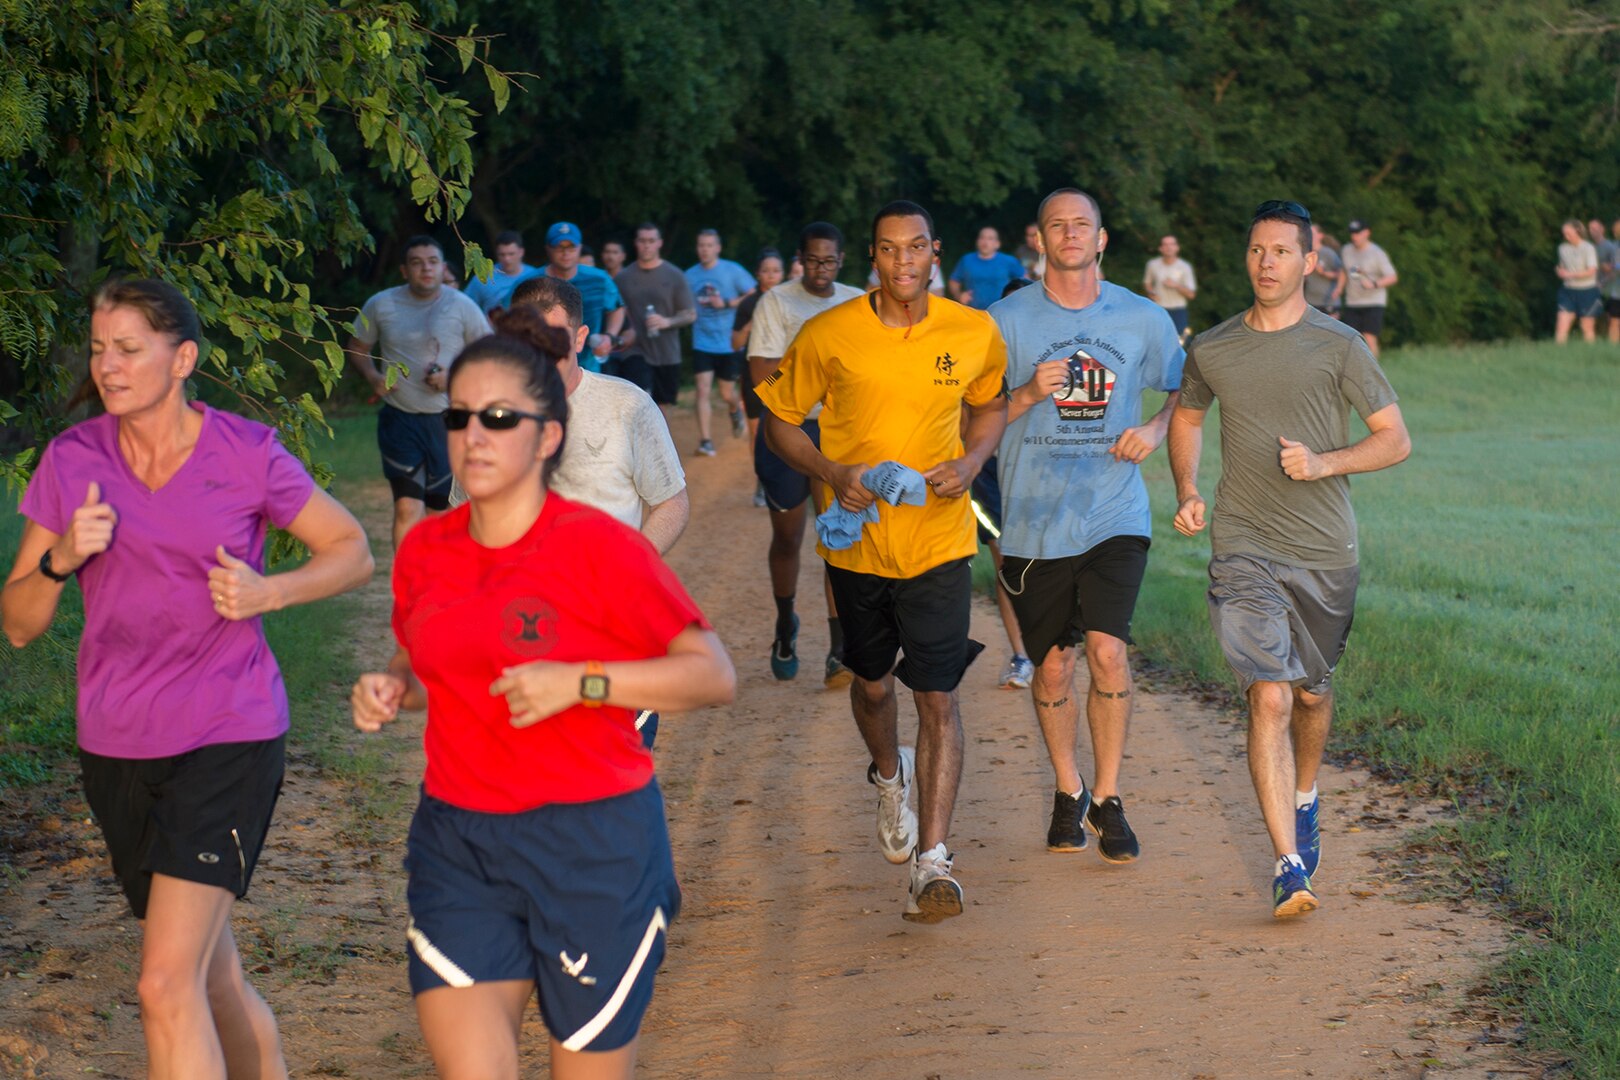 In honor of 9/11 Remembrance Day, members of Joint Base San Antonio participated in a 9-hour-and-11-minute commemorative run Sept. 9, 2016, at JBSA-Lackland Medina
Annex, Texas.